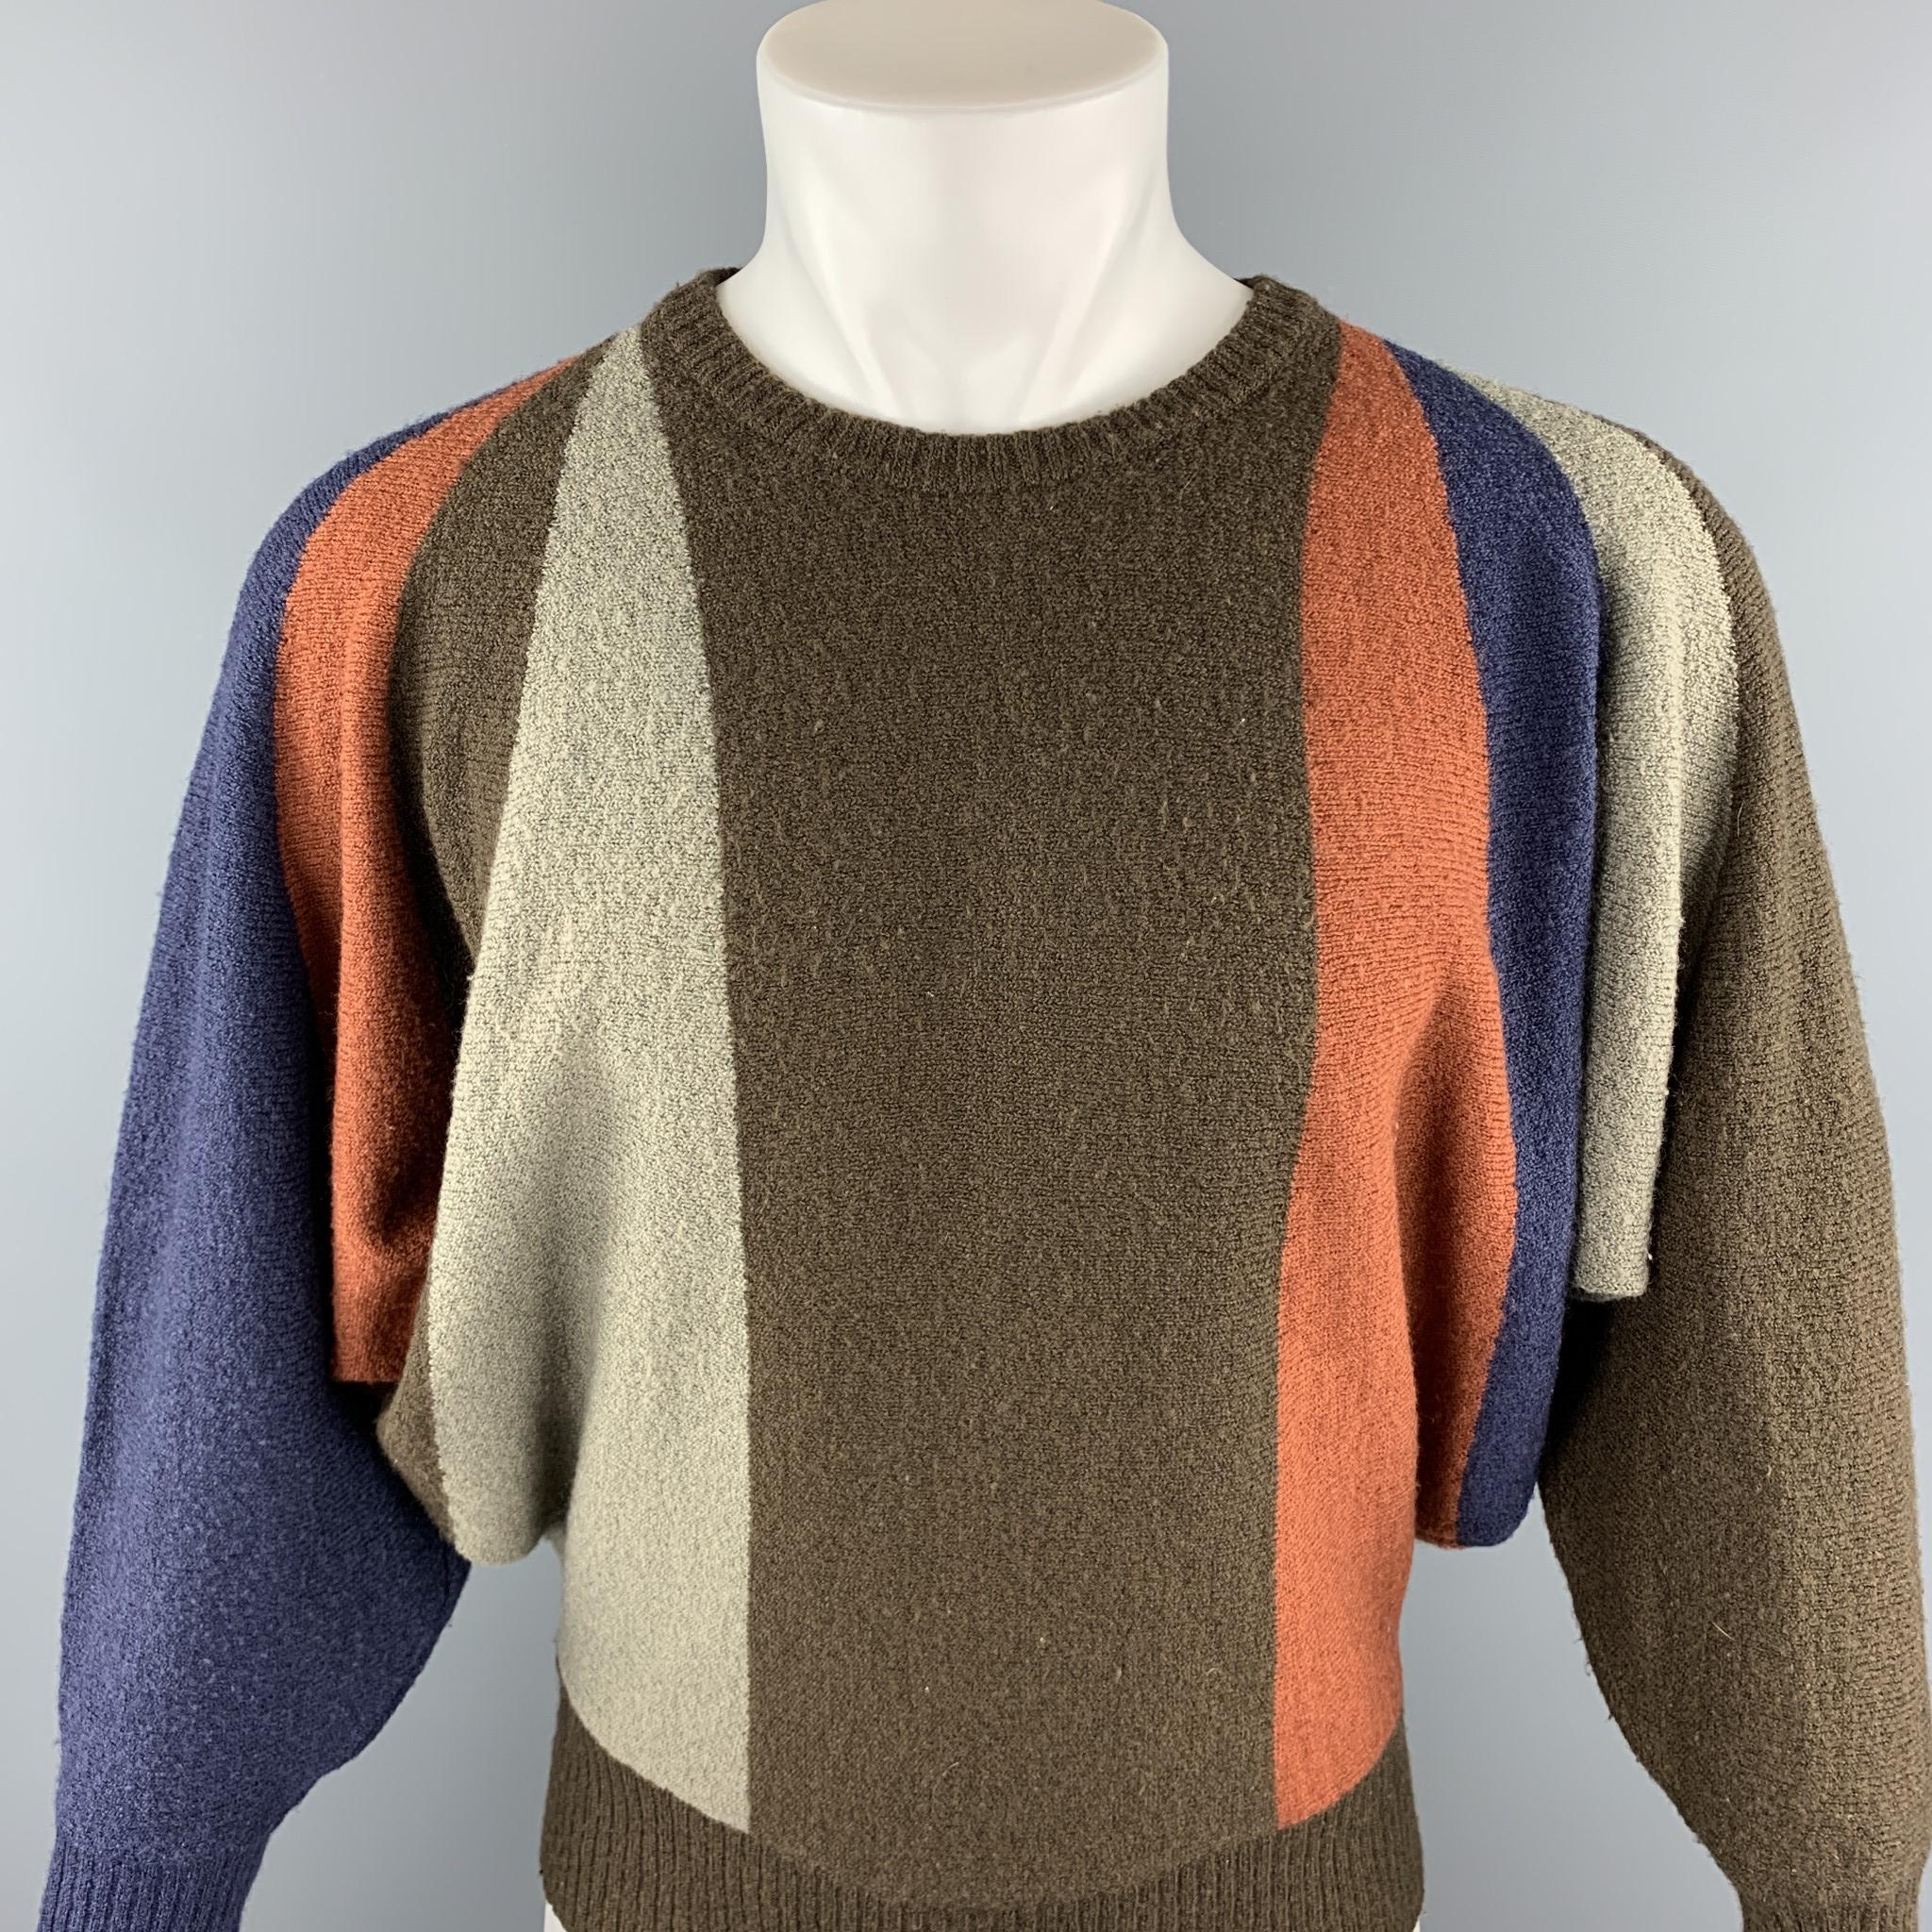 Vintage ISSEY MIYAKE sweater comes in a multi-color wool blend featuring bat wing sleeves and a ribbed crew-neck. 

Very Good Pre-Owned Condition.
Marked: No size marked

Measurements:

Shoulder: 19 in. 
Chest: 54 in. 
Sleeve: 22 in. 
Length: 24.5